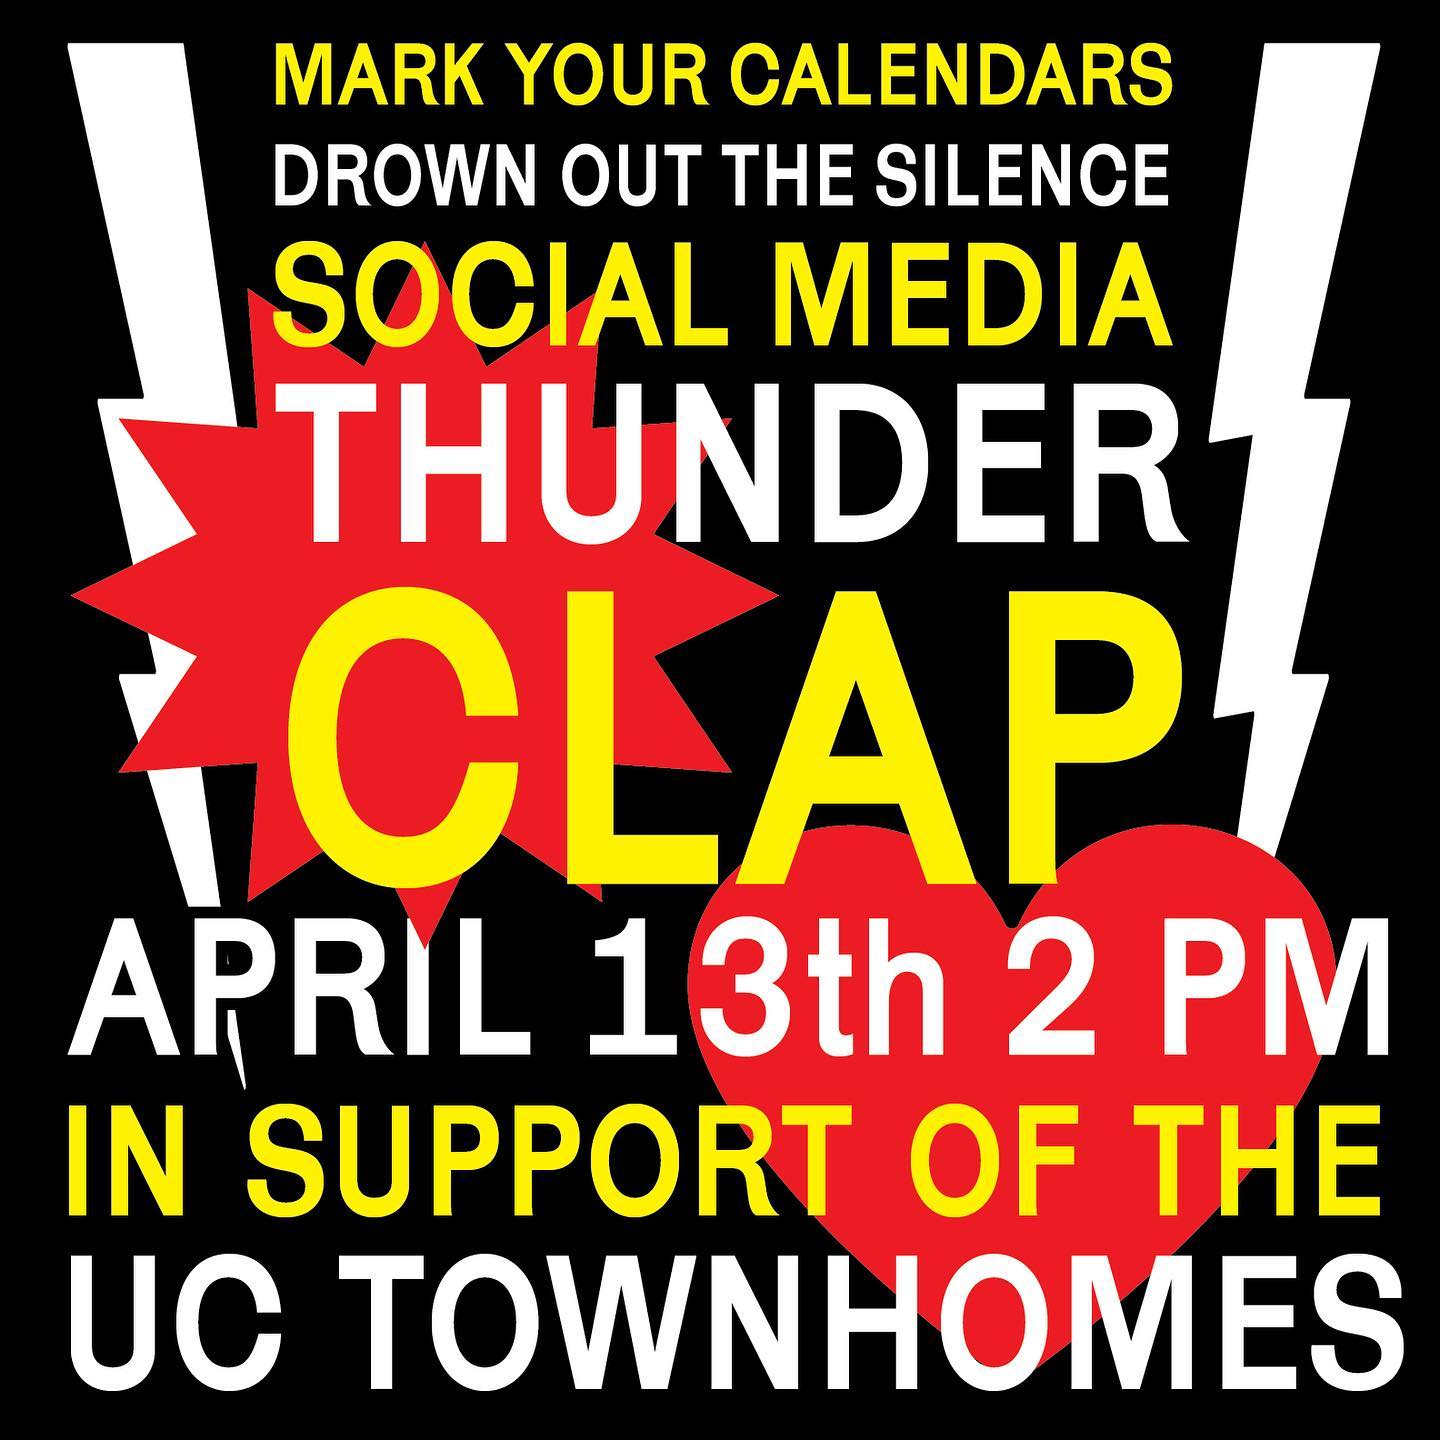 Flyer for Thundercalp action -- contact Altman Management and tell them to stop displacement of the UC Townhomes!